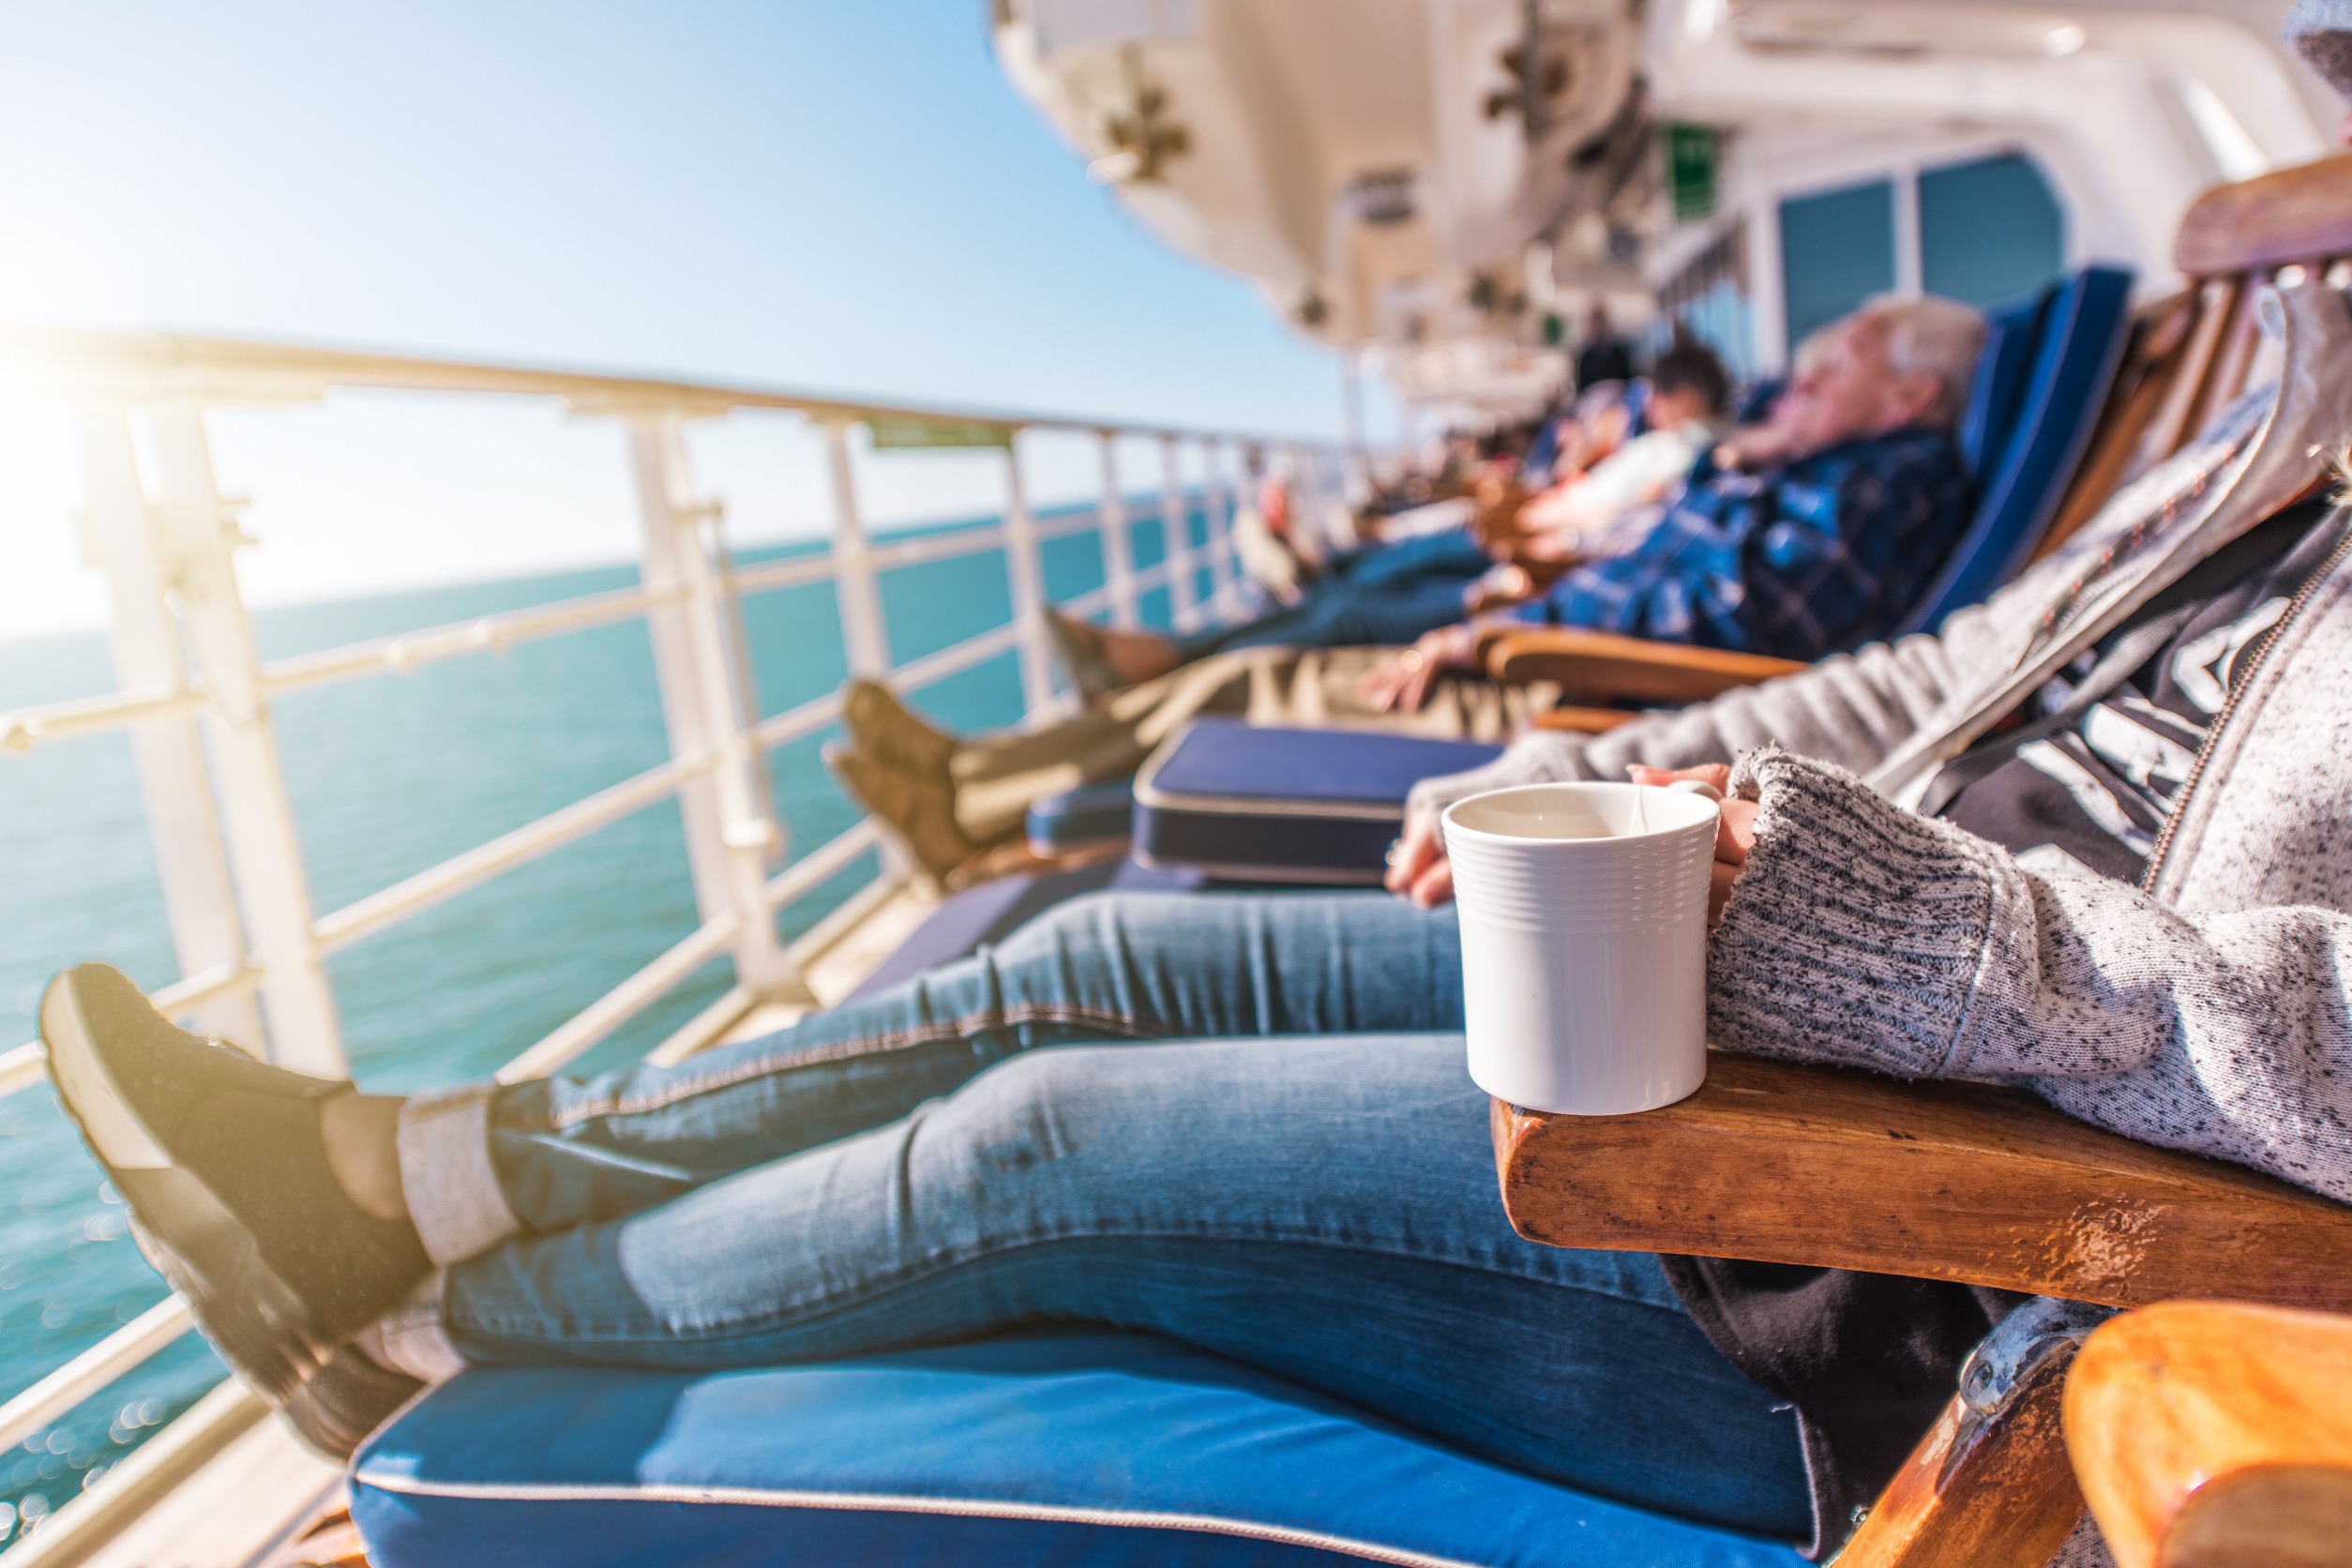 People relaxing on a cruise ship deck.